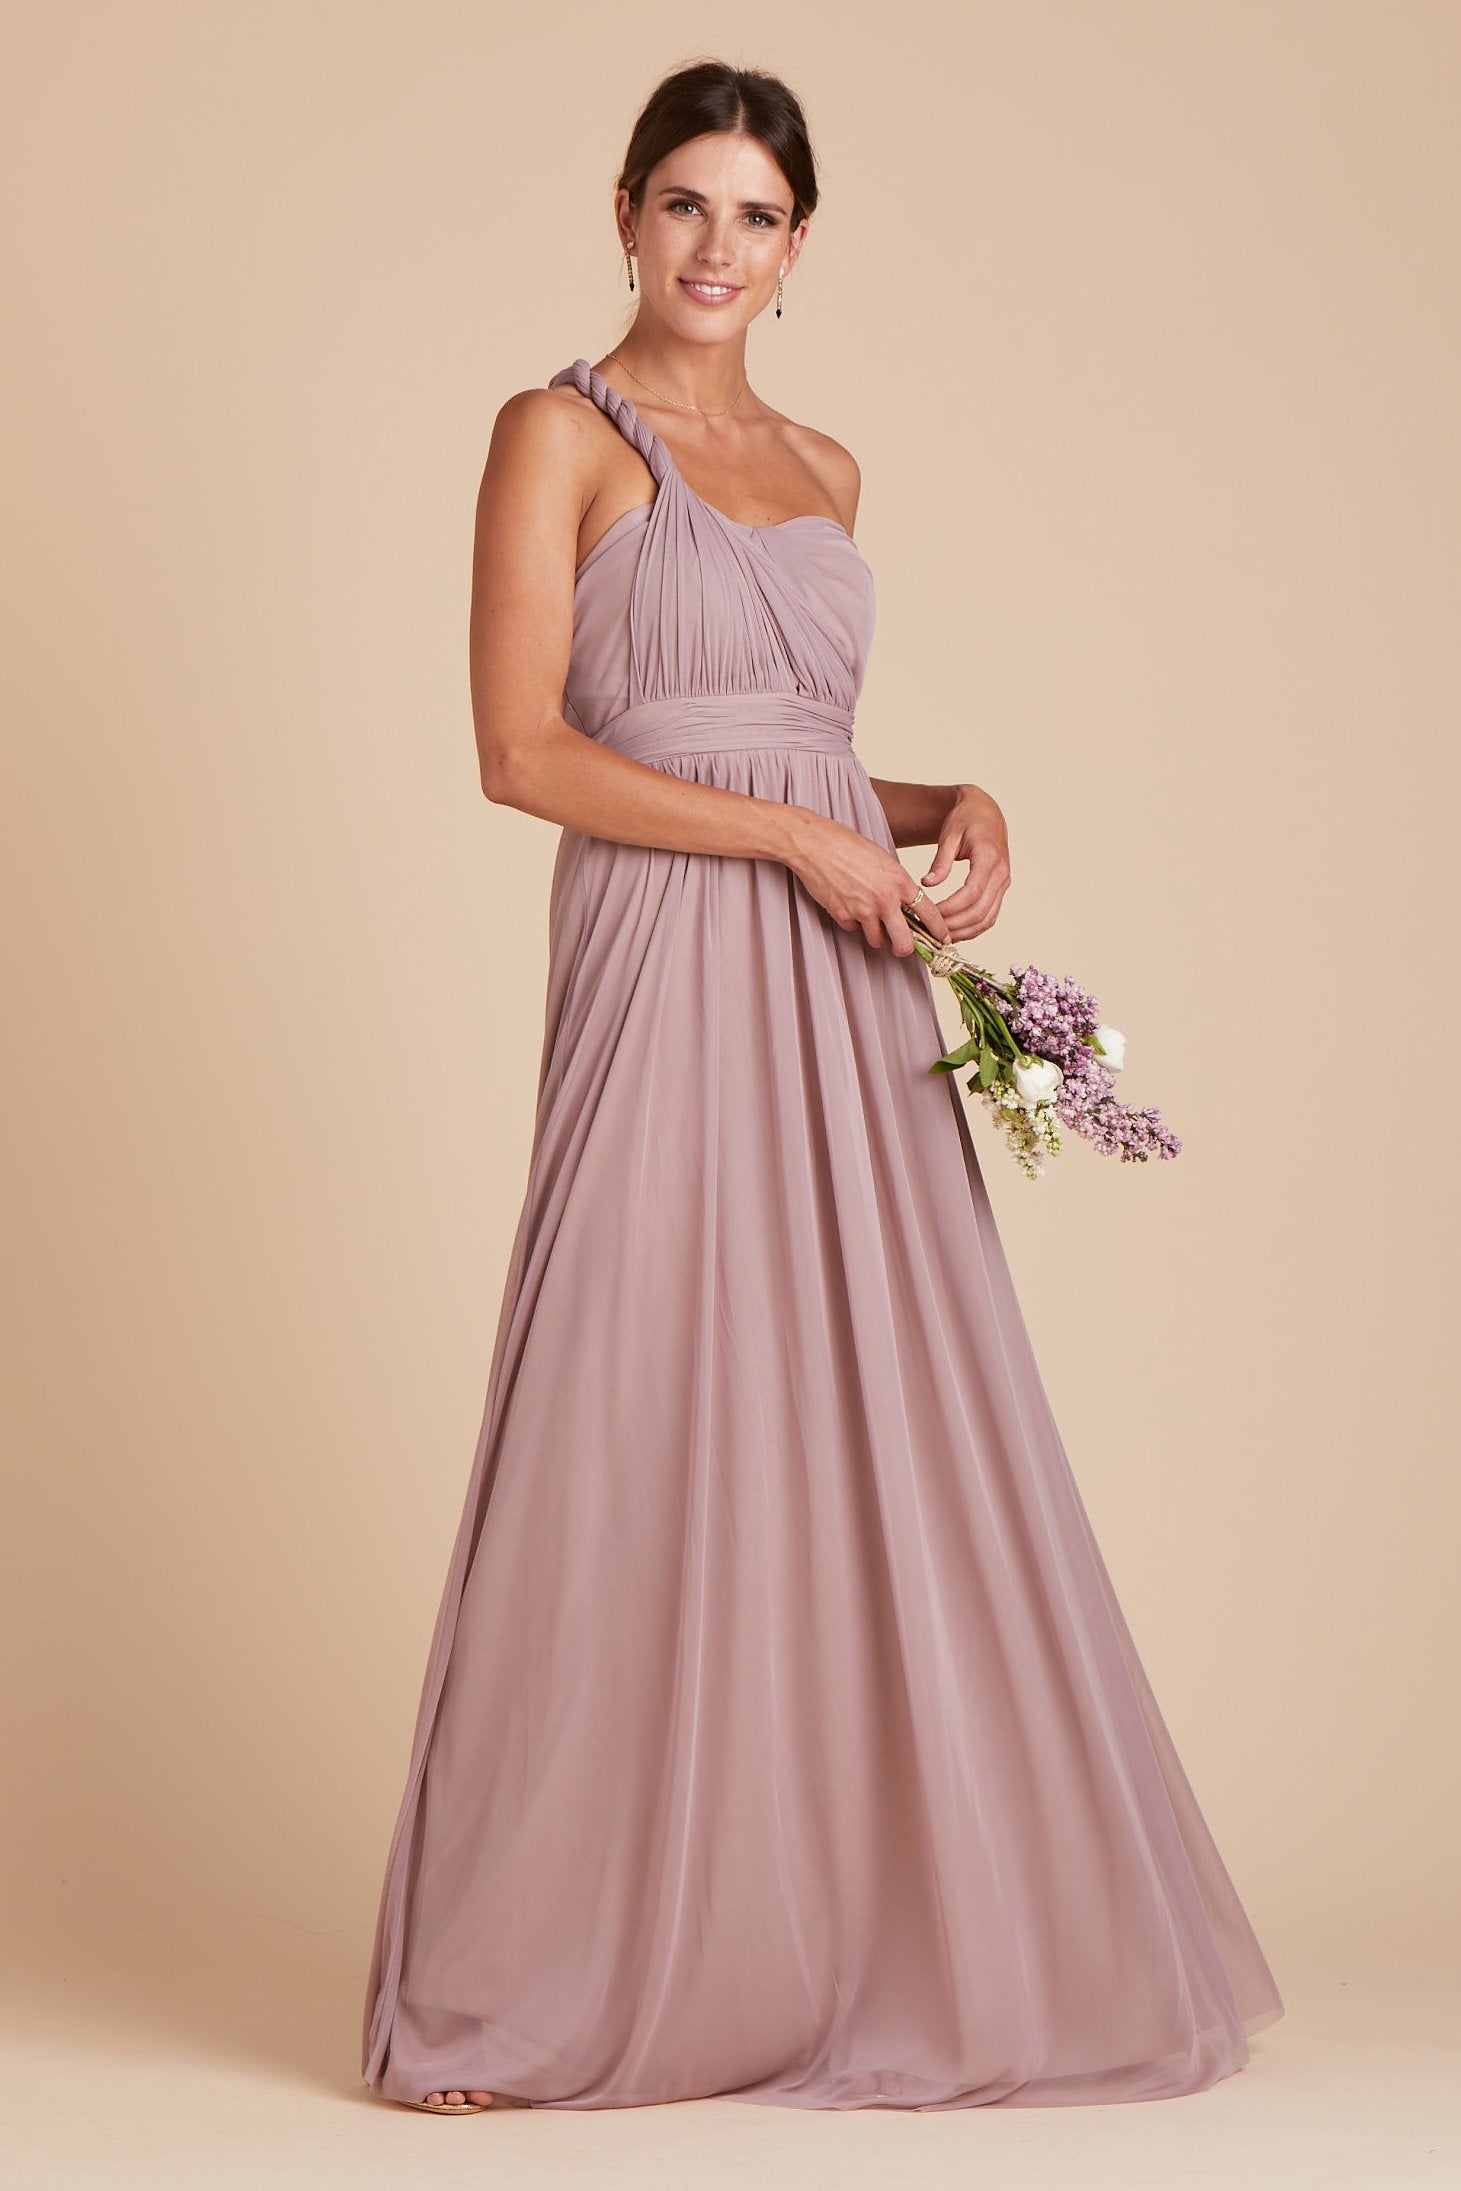 Chicky convertible bridesmaid dress in mauve purple mesh by Birdy Grey, side view